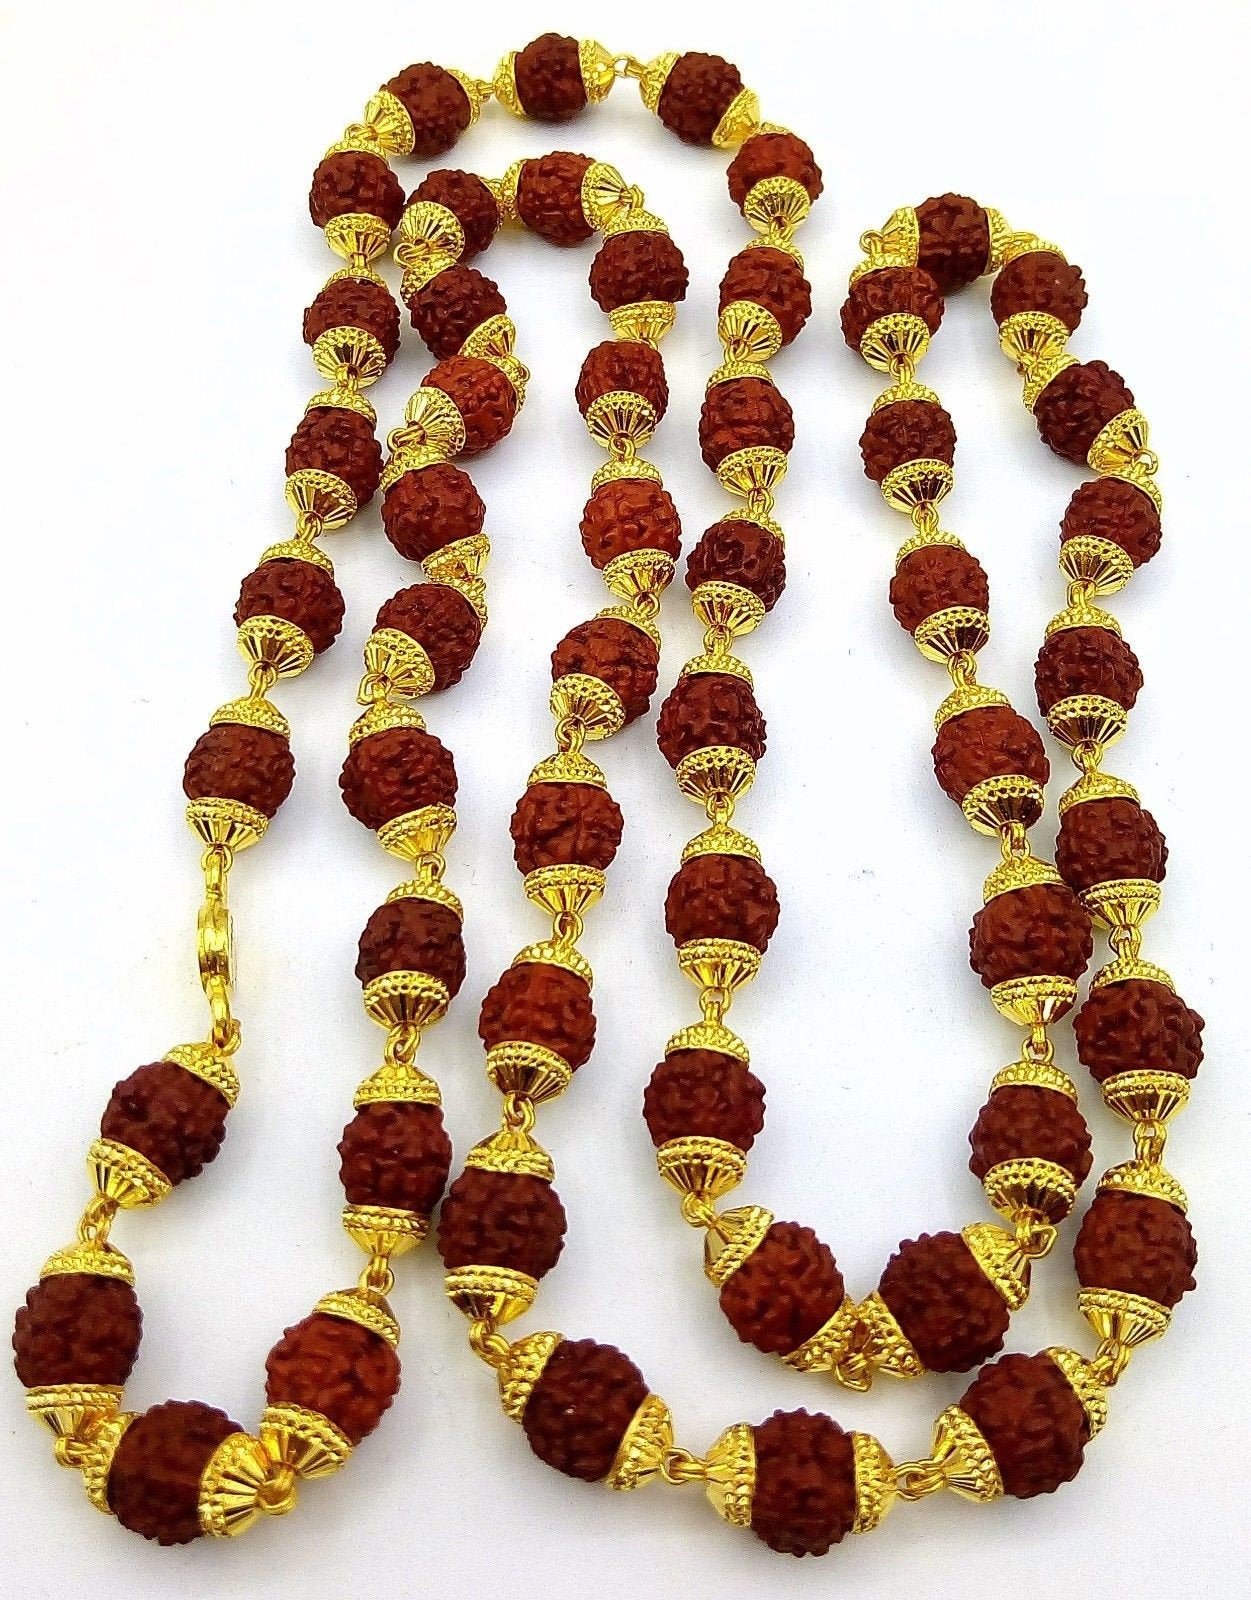 Natural rudraksha 54 bead japp mala certified 22kt yellow gold gorgeous handmade 25 inches  beads chain necklace From rajasthan - TRIBAL ORNAMENTS